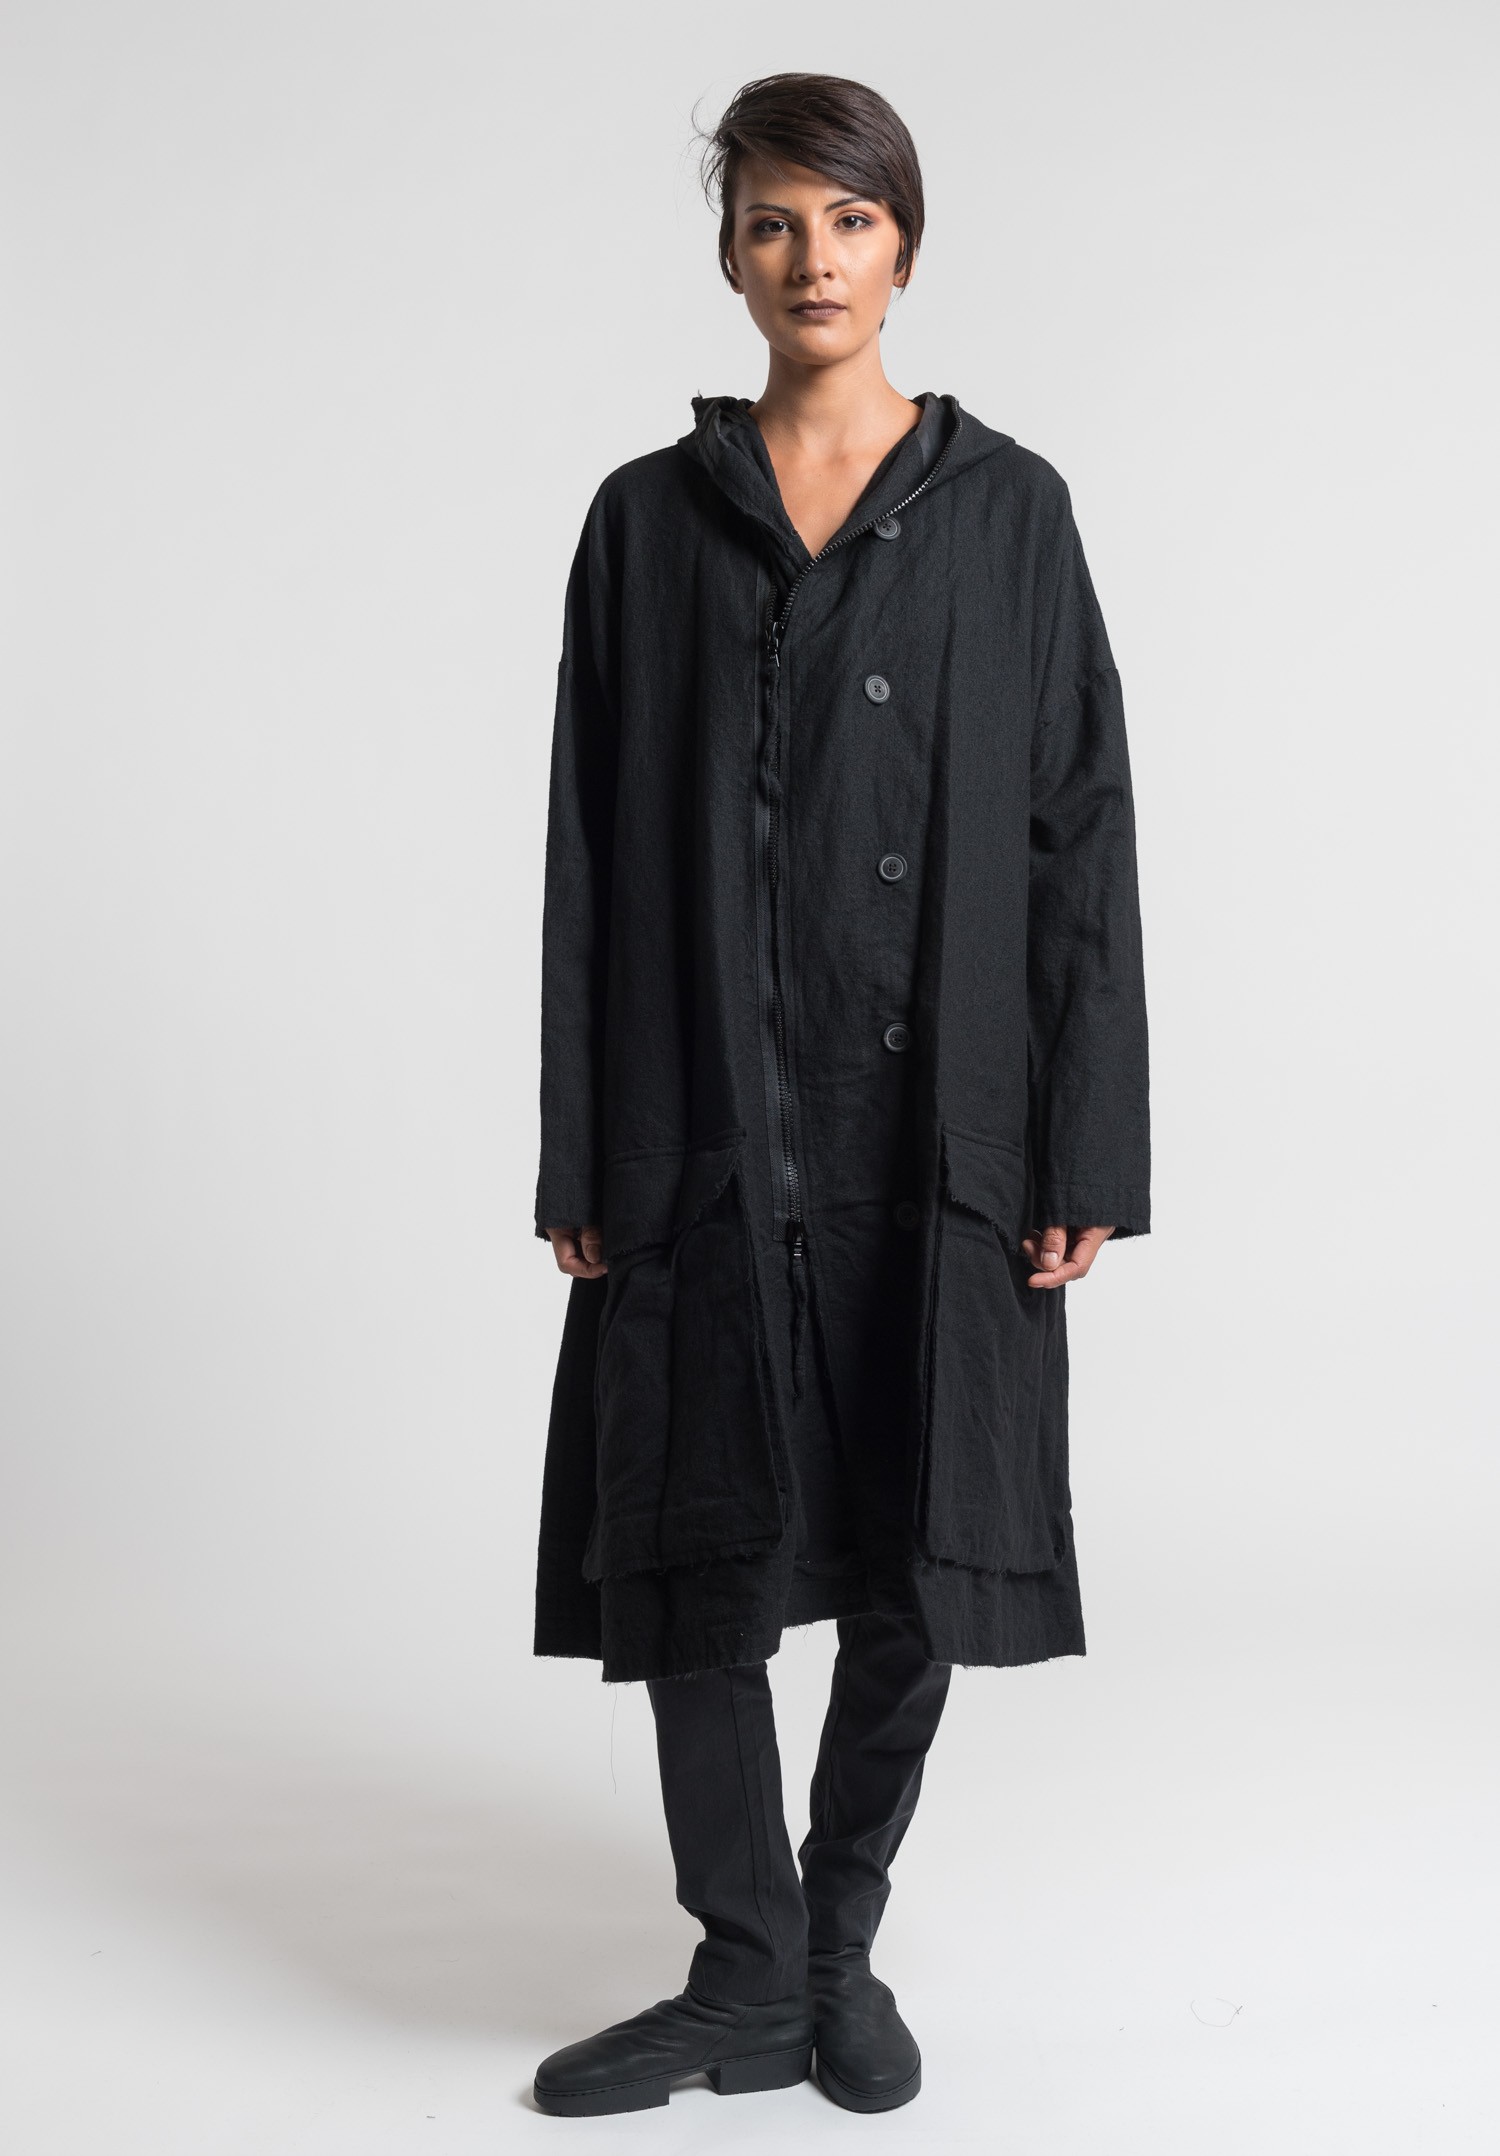 Rundholz Hooded A-Line Coat in Charcoal | Santa Fe Dry Goods Trippen ...